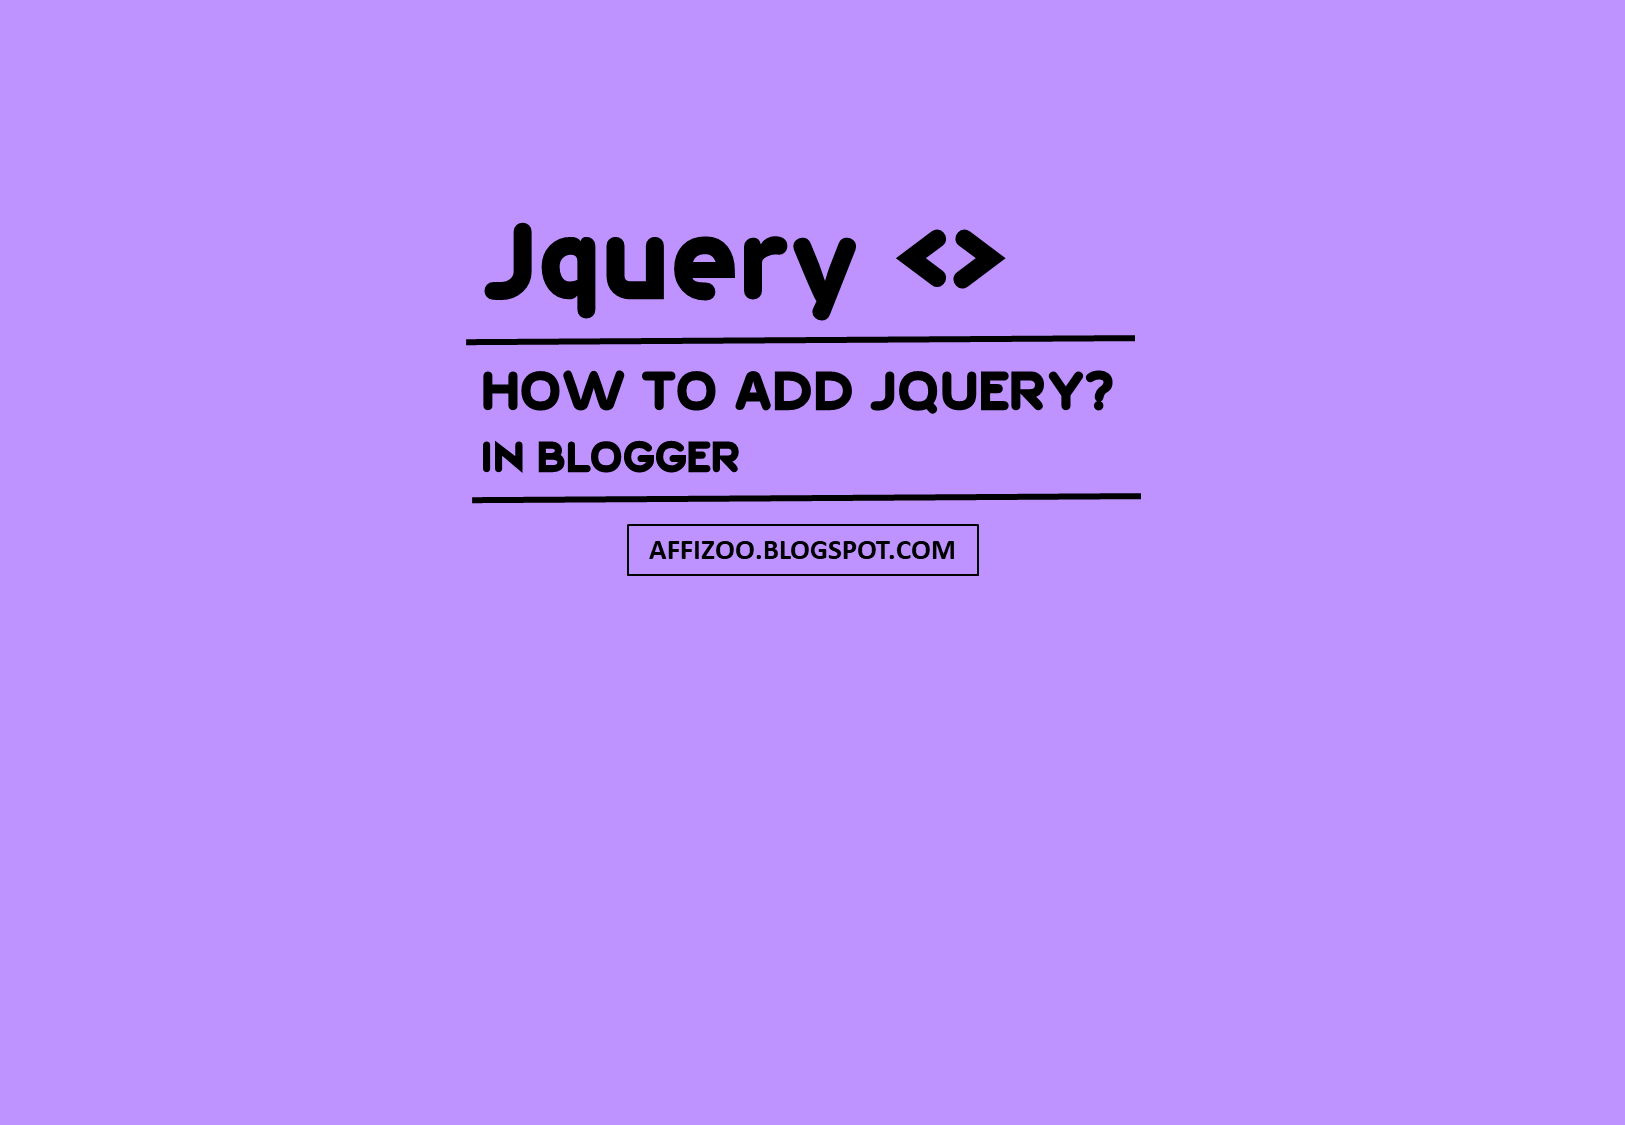 How To Add JQuery, Json & Javascript To Blogger Template In 2021 [Optimized]